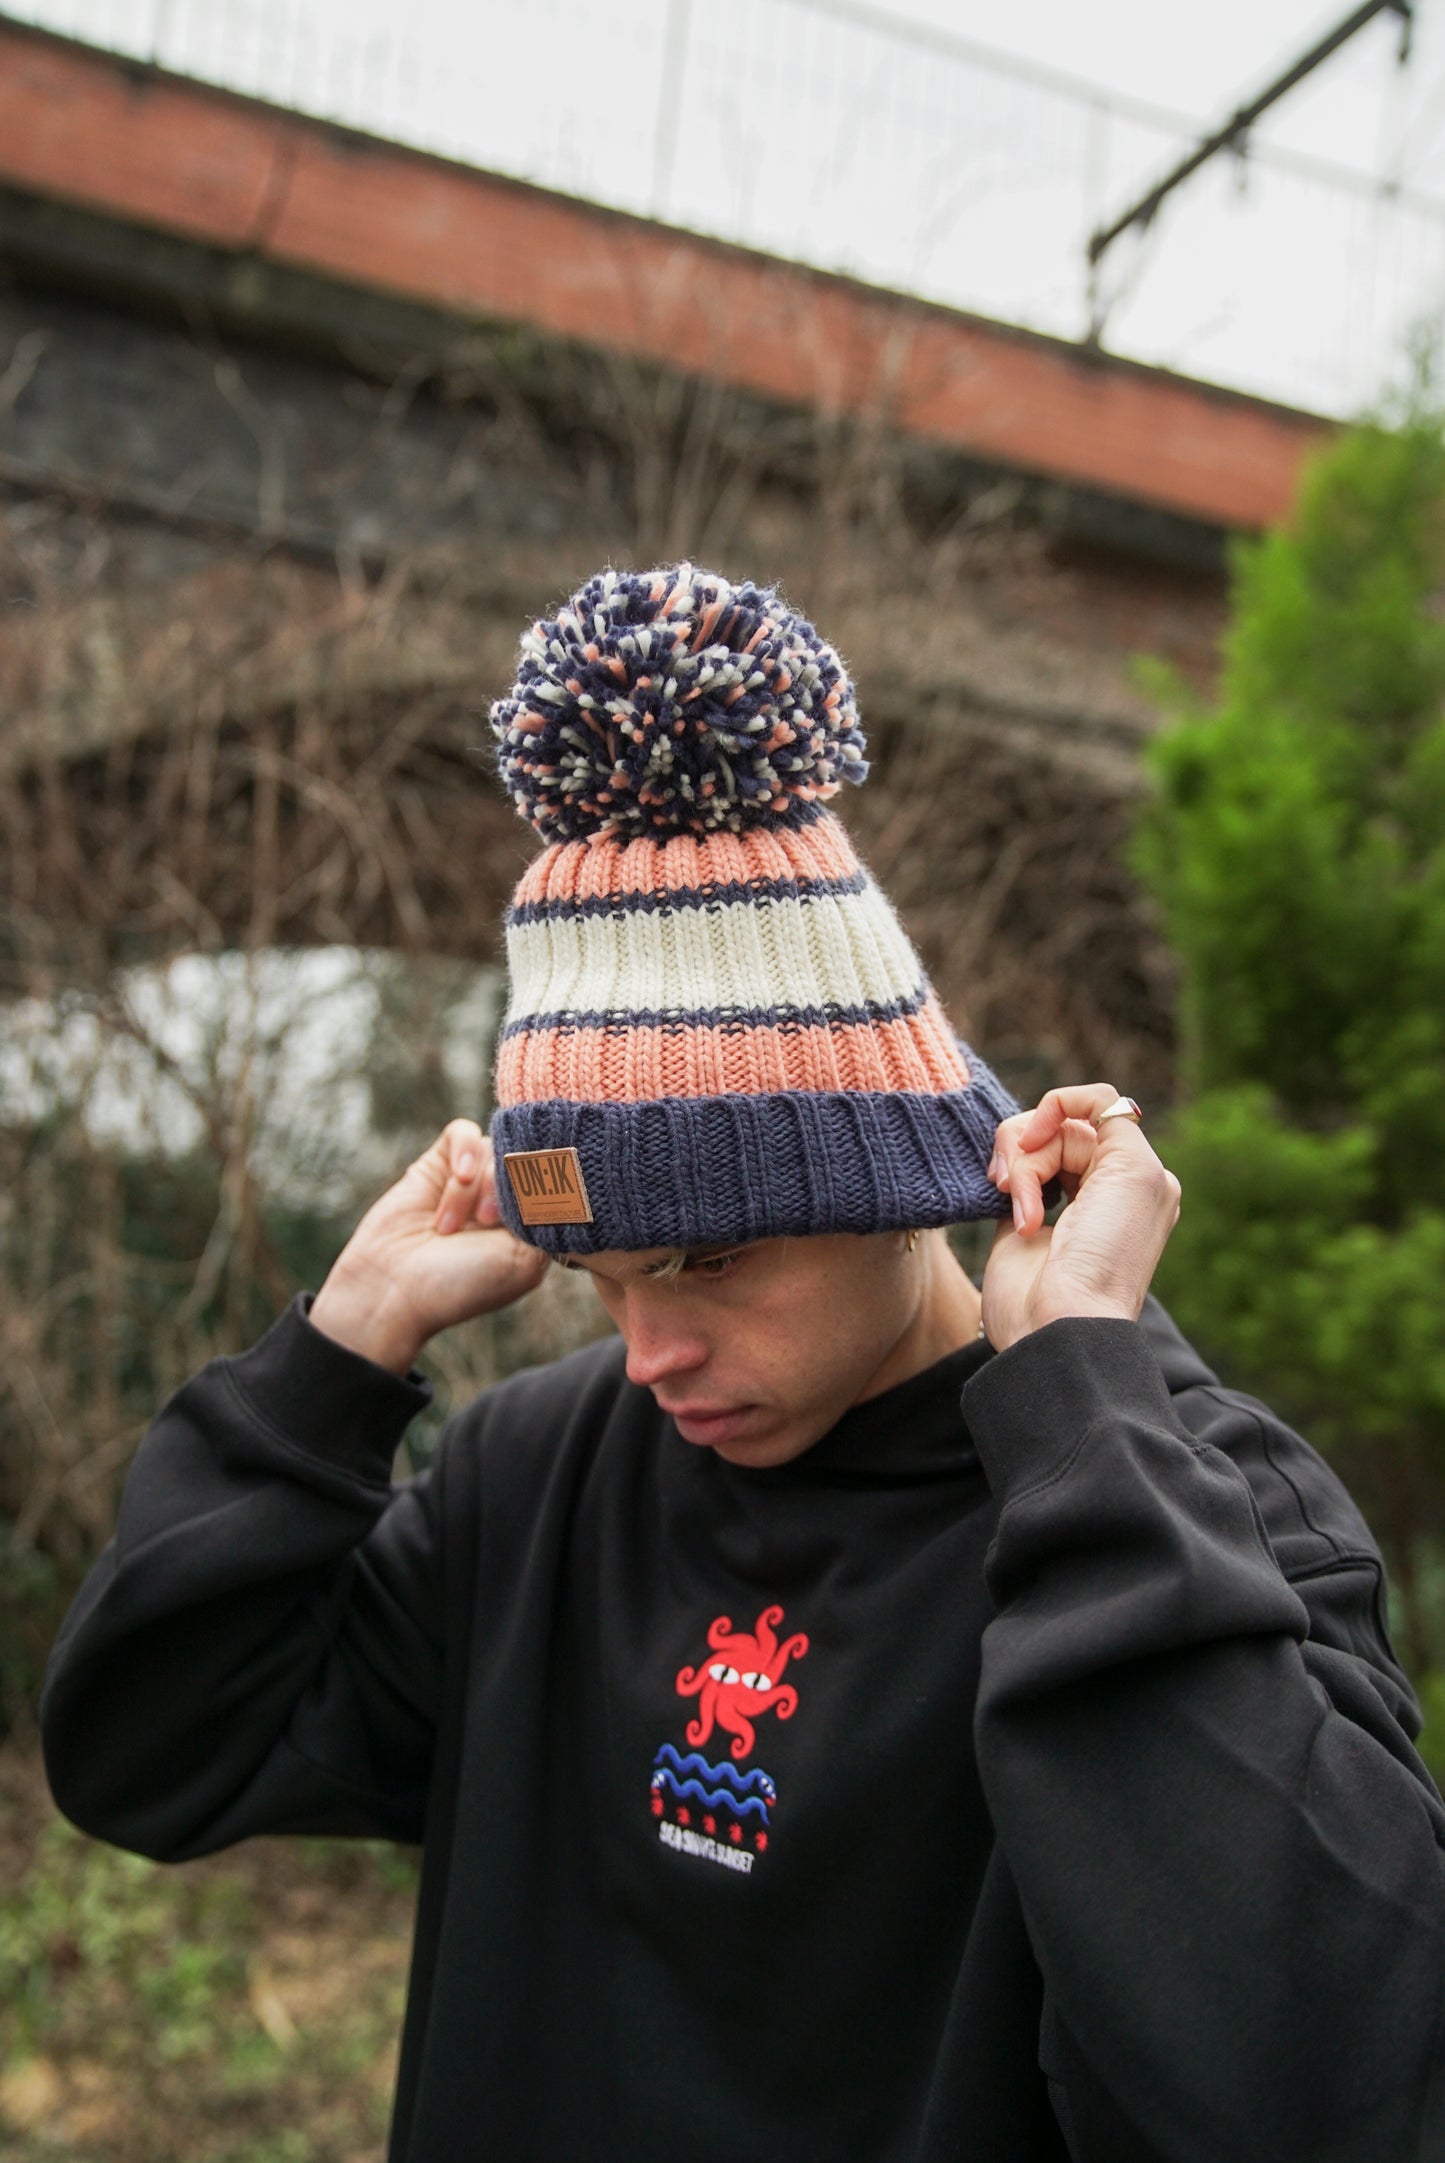 Essentials Winter Cable Bobble Hat Beanies